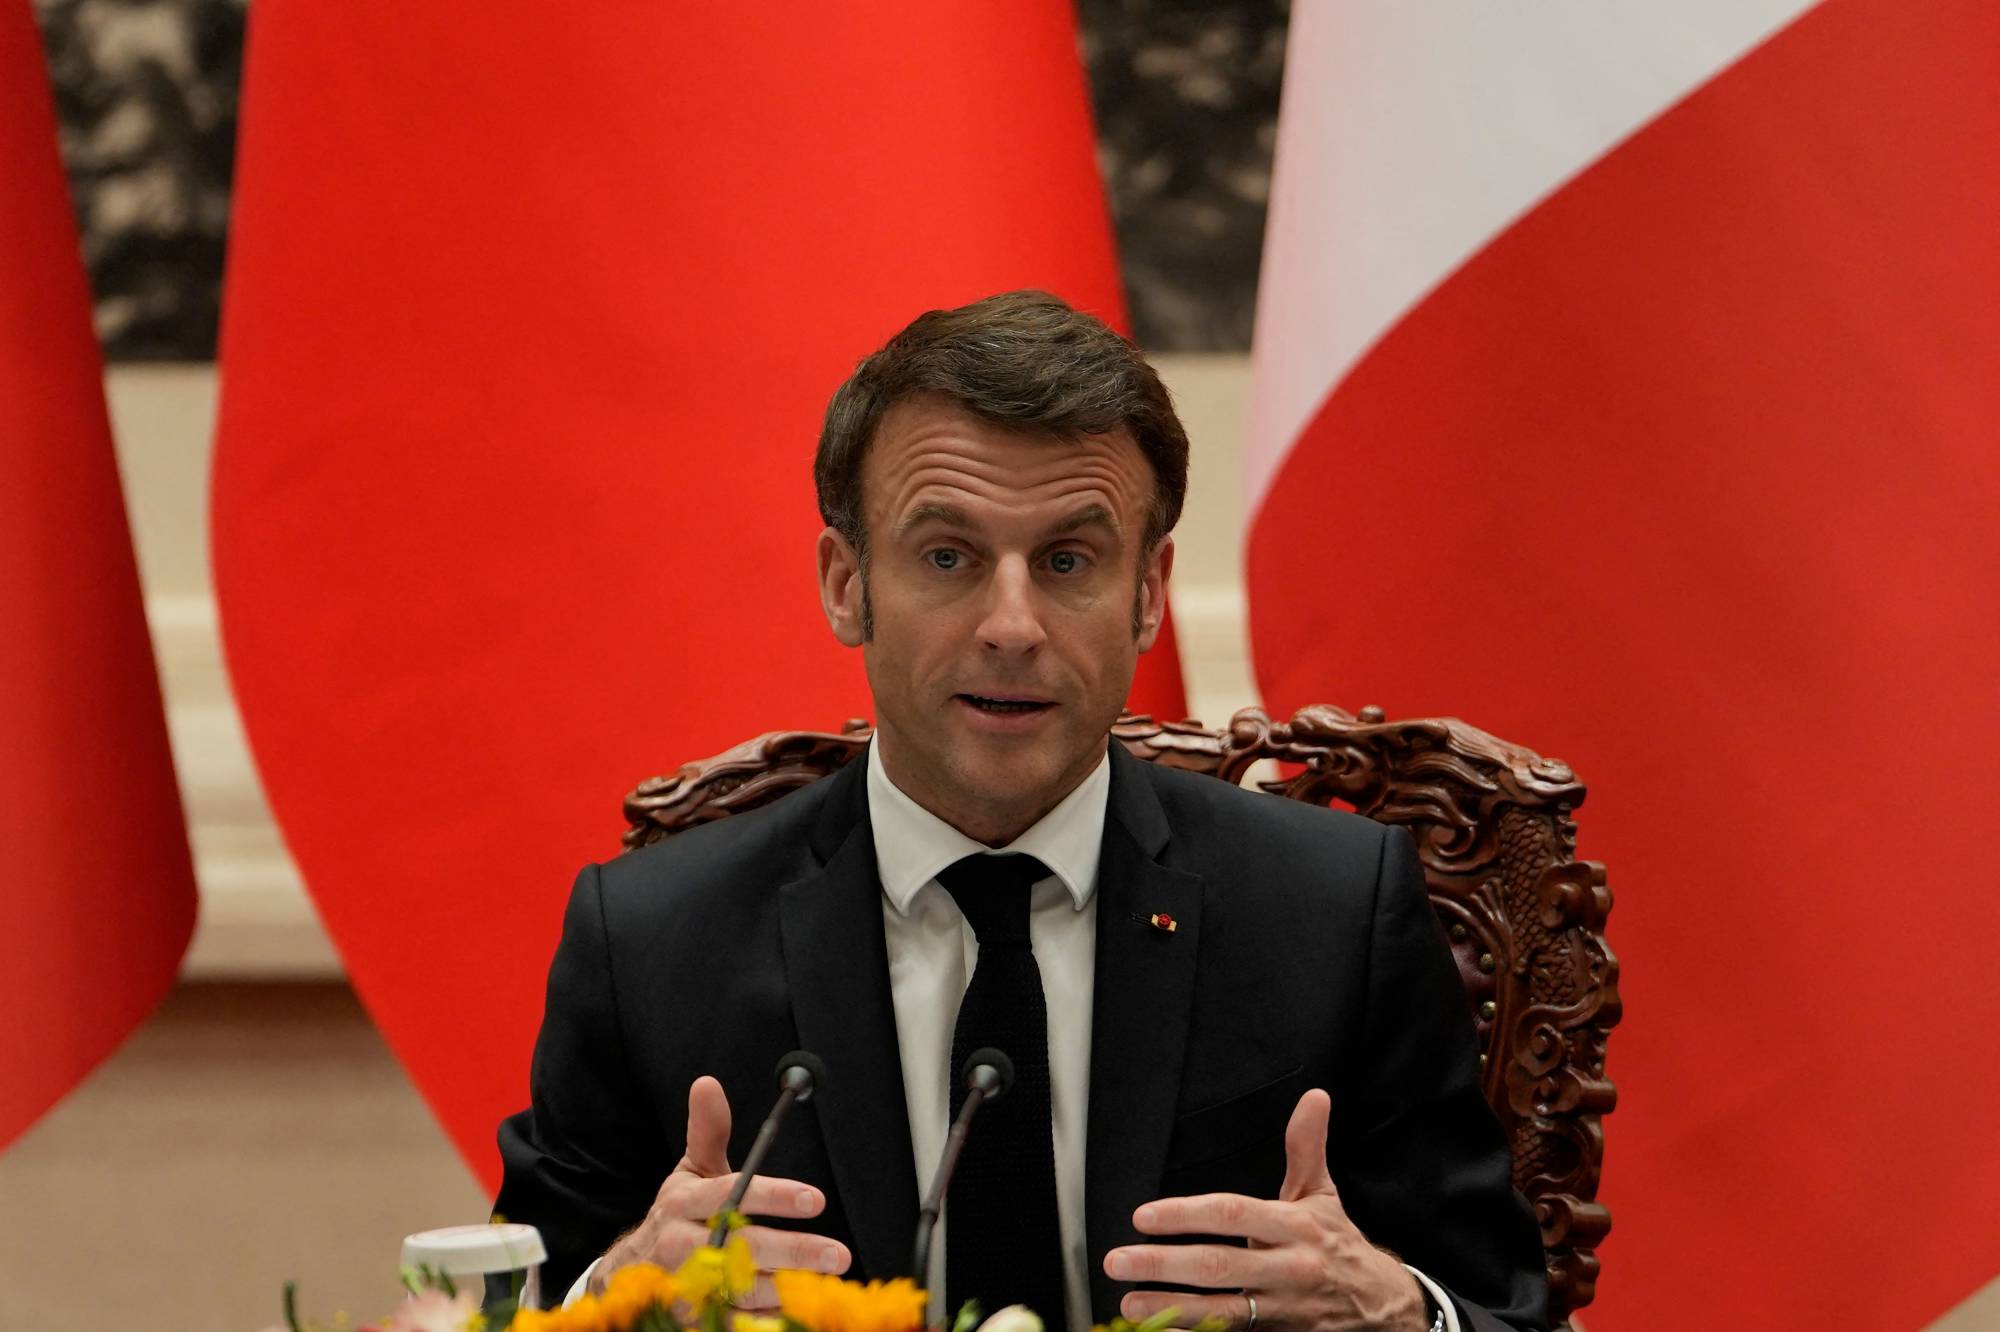 French President Emmanuel Macron addresses a news conference after meeting with Chinese leader Xi Jinping in Beijing on April 6. Macron disappointed many allies with his comments on Taiwan-China relations.  | POOL / VIA AFP)